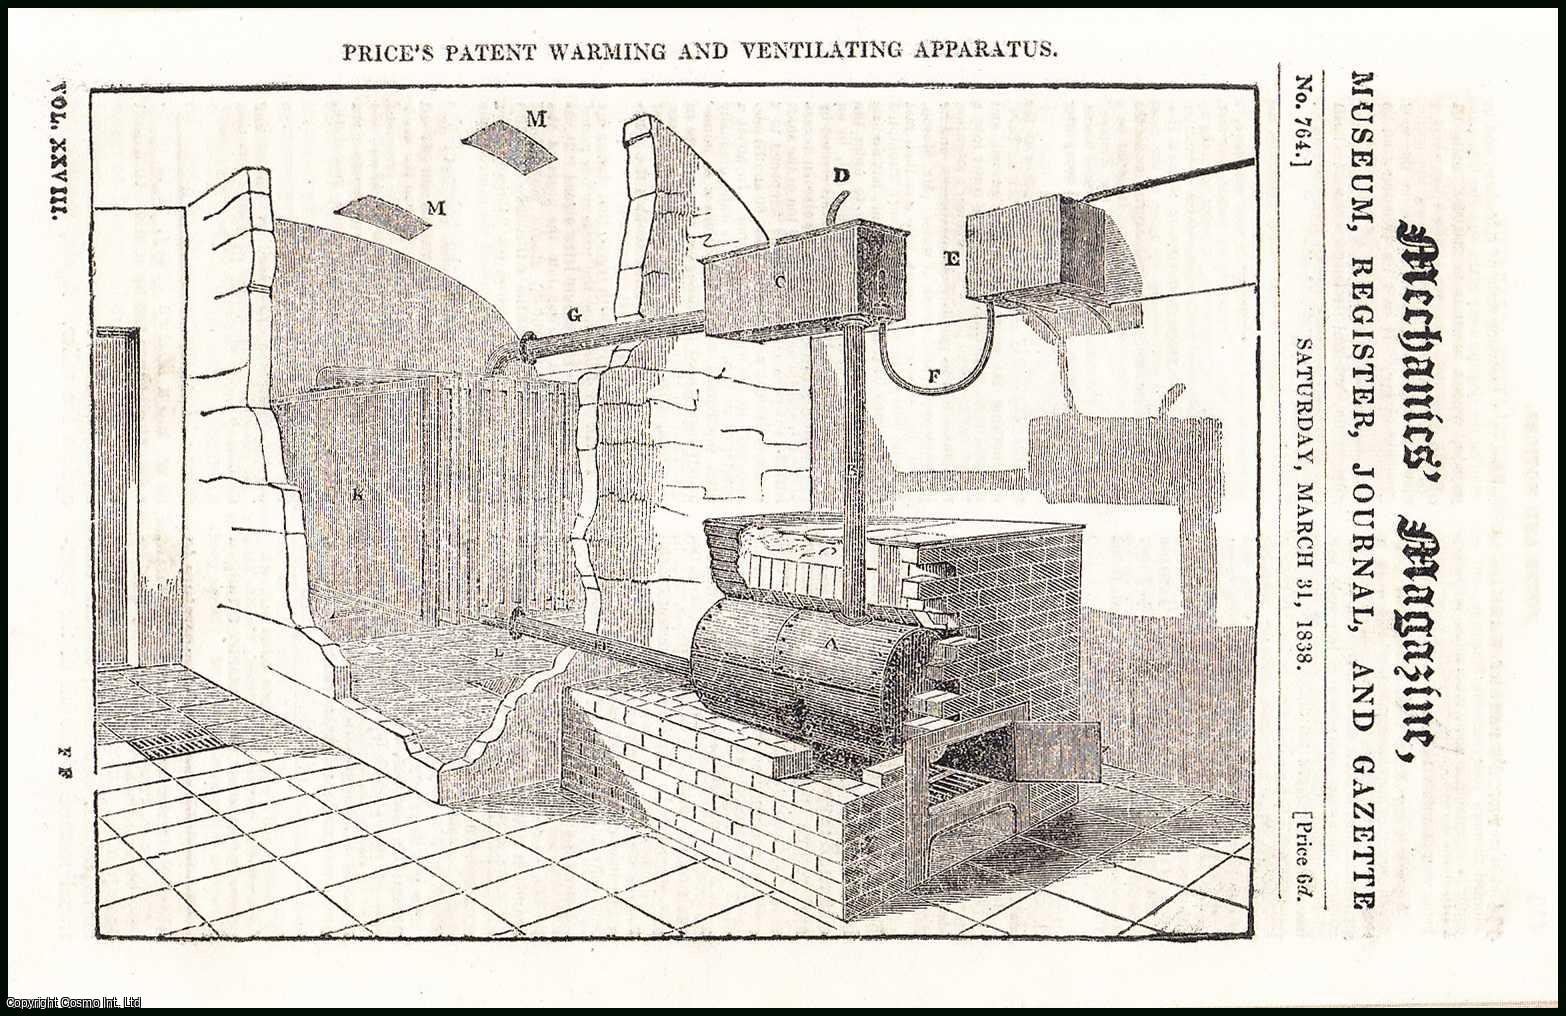 Mechanics Magazine - Price's Patent Warming & Ventilating Apparatus; Oxley's Calculations on Davenport's Engine - the Victoria Explosion; the Manufacture of Cotton & Woollen Goods, etc. Mechanics Magazine, Museum, Register, Journal and Gazette. Issue No. 764. A complete rare weekly issue of the Mechanics' Magazine, 1838.